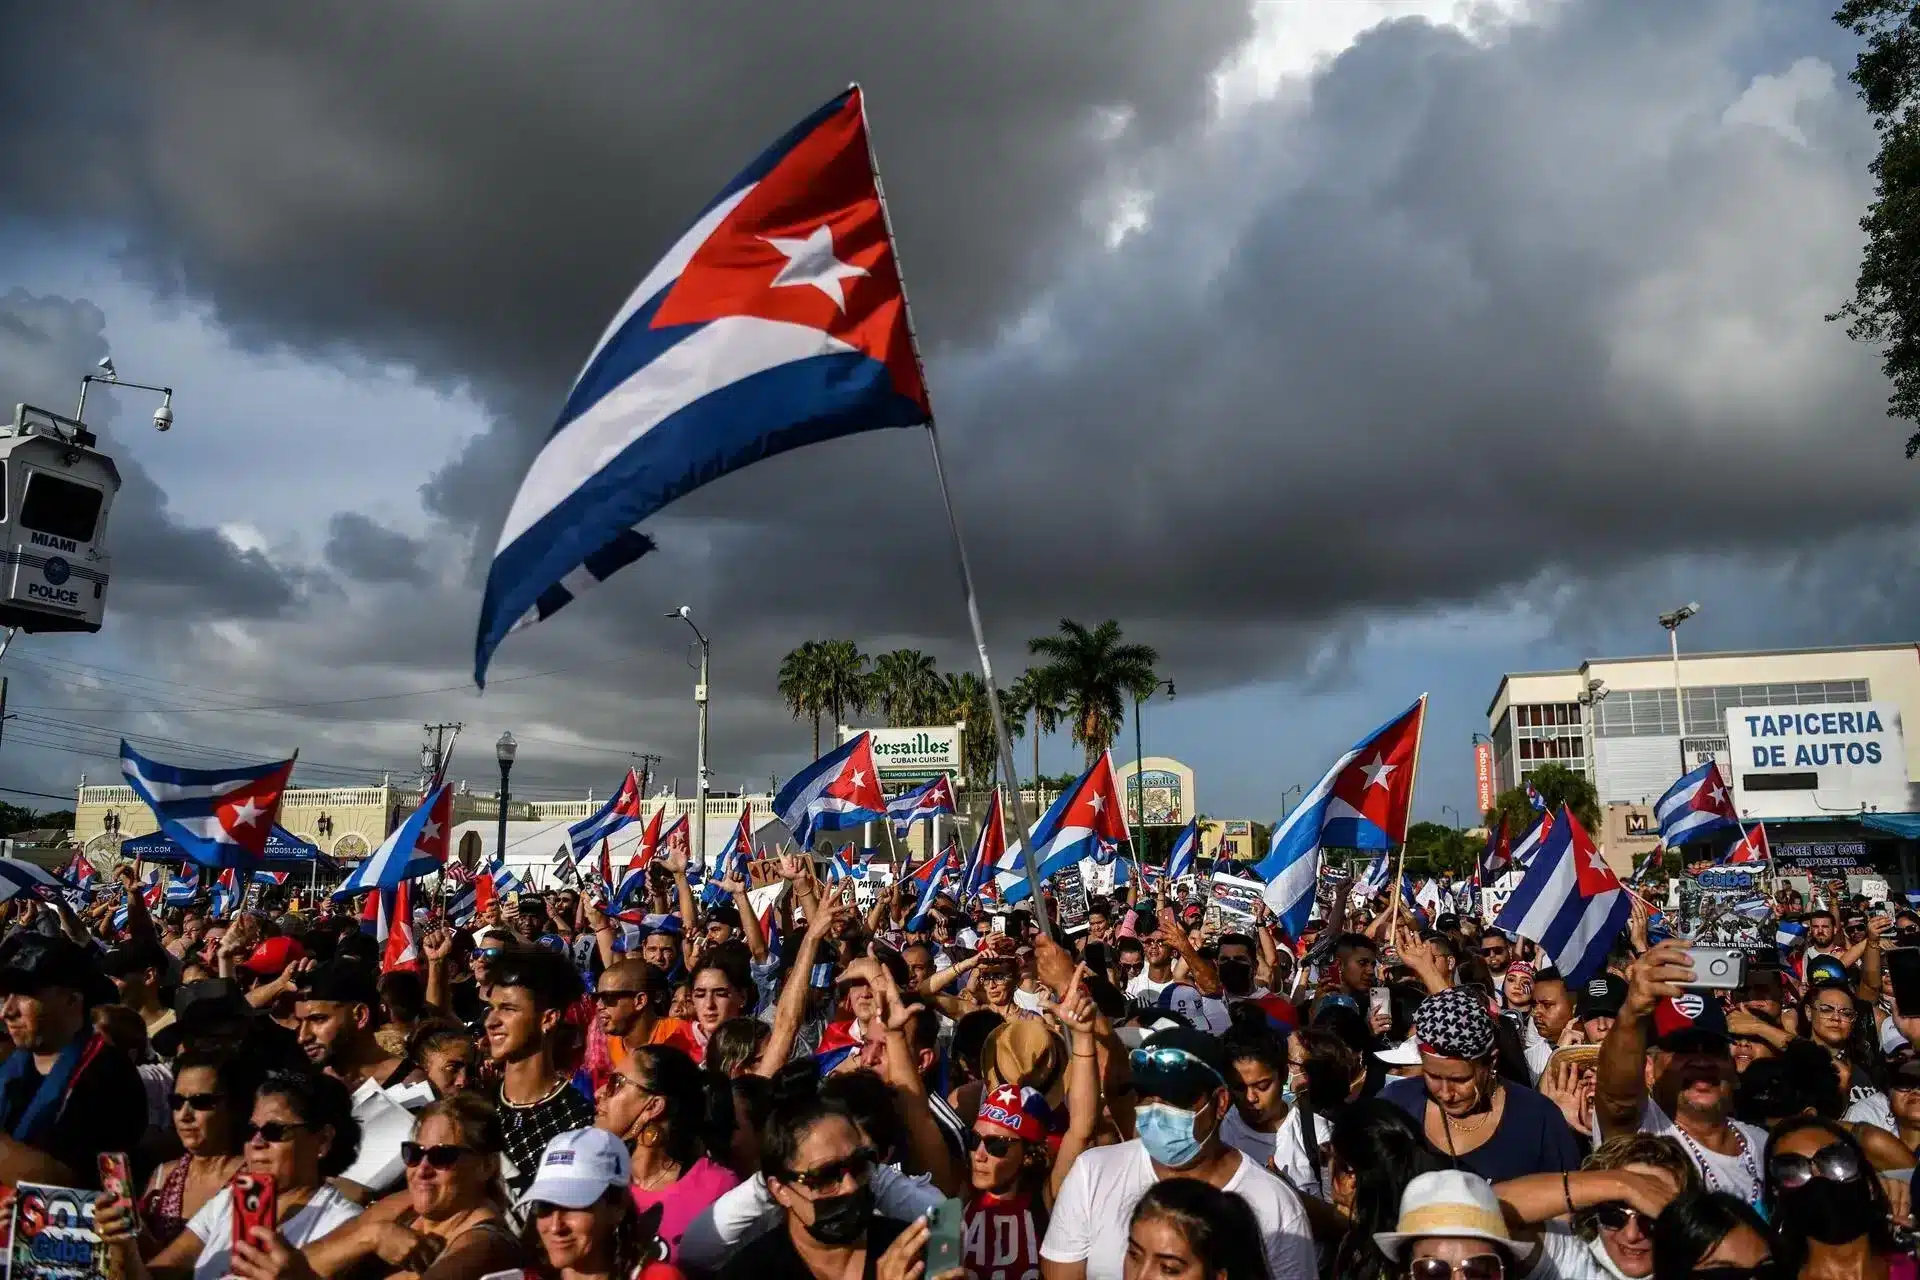 Cuban Americans hold a rally in Miami to support dissidents on the island, July 2021. Photo: Flickr.